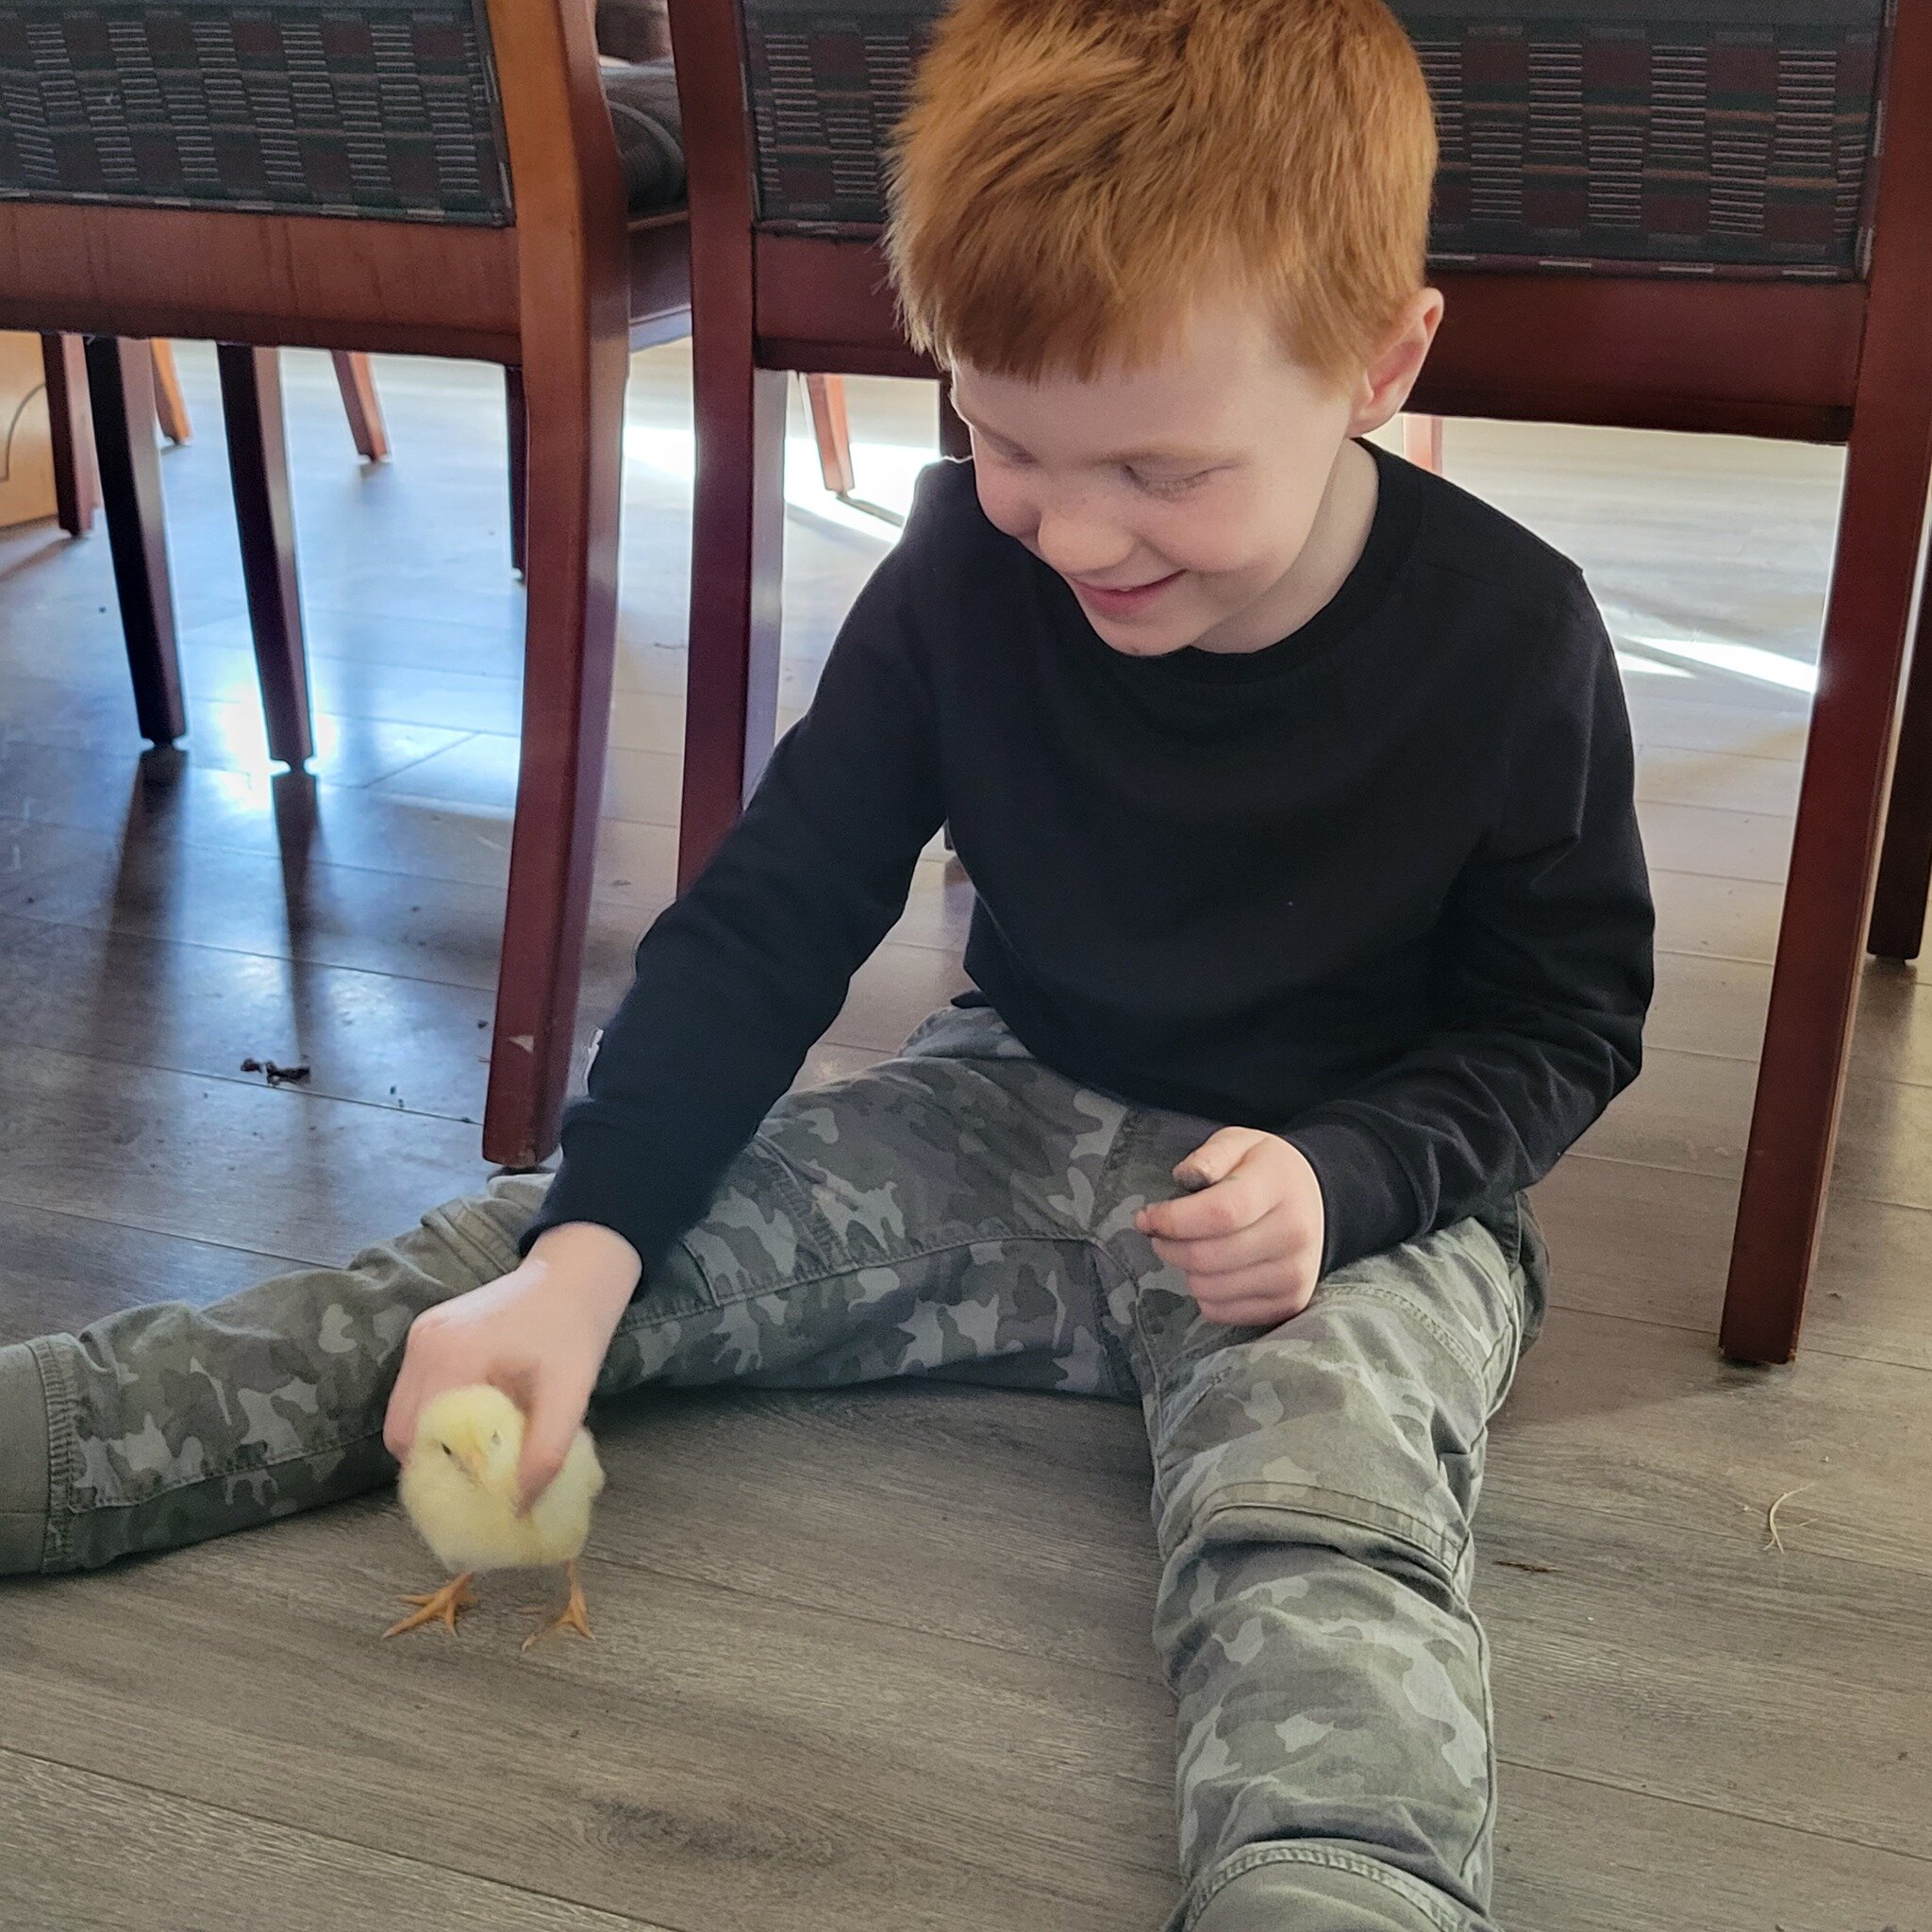 Some special (and cute!) guests joined the Trekkers group last week! The children learned and practiced safe and gentle techniques to handle the 3-day-old chicks. 🐤